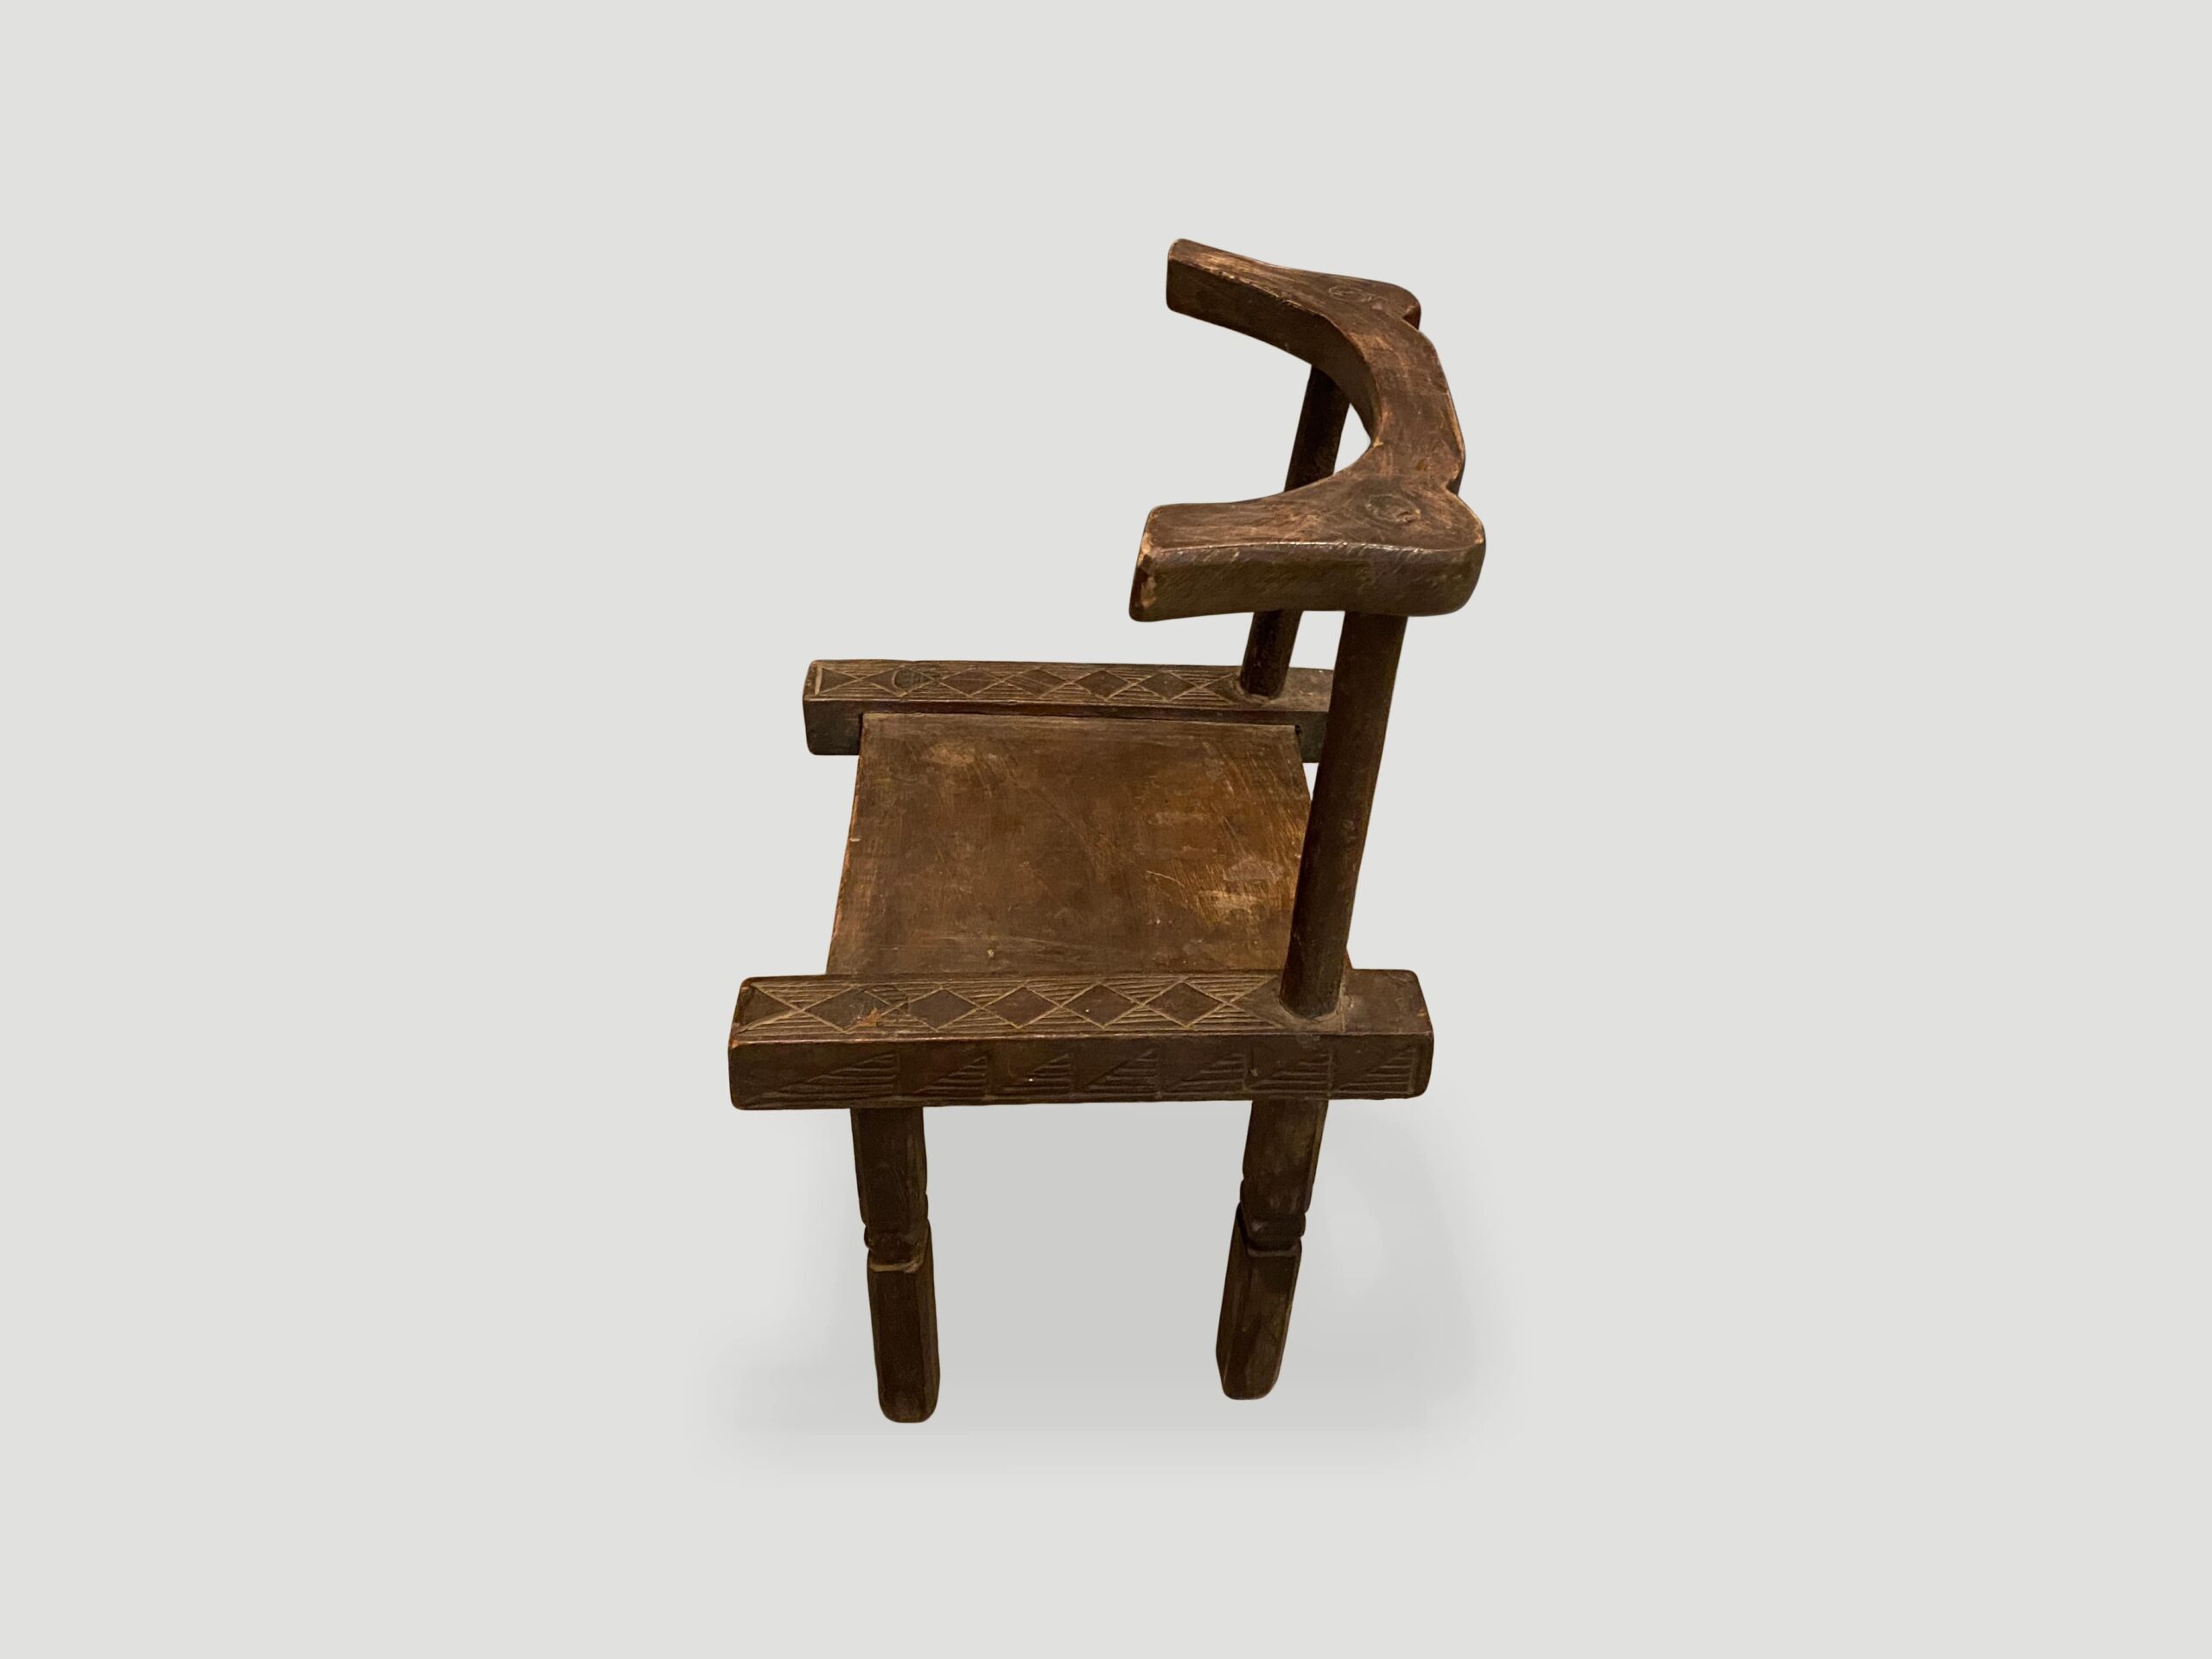 Hand carved wooden chair from the Ivory Coast of Africa